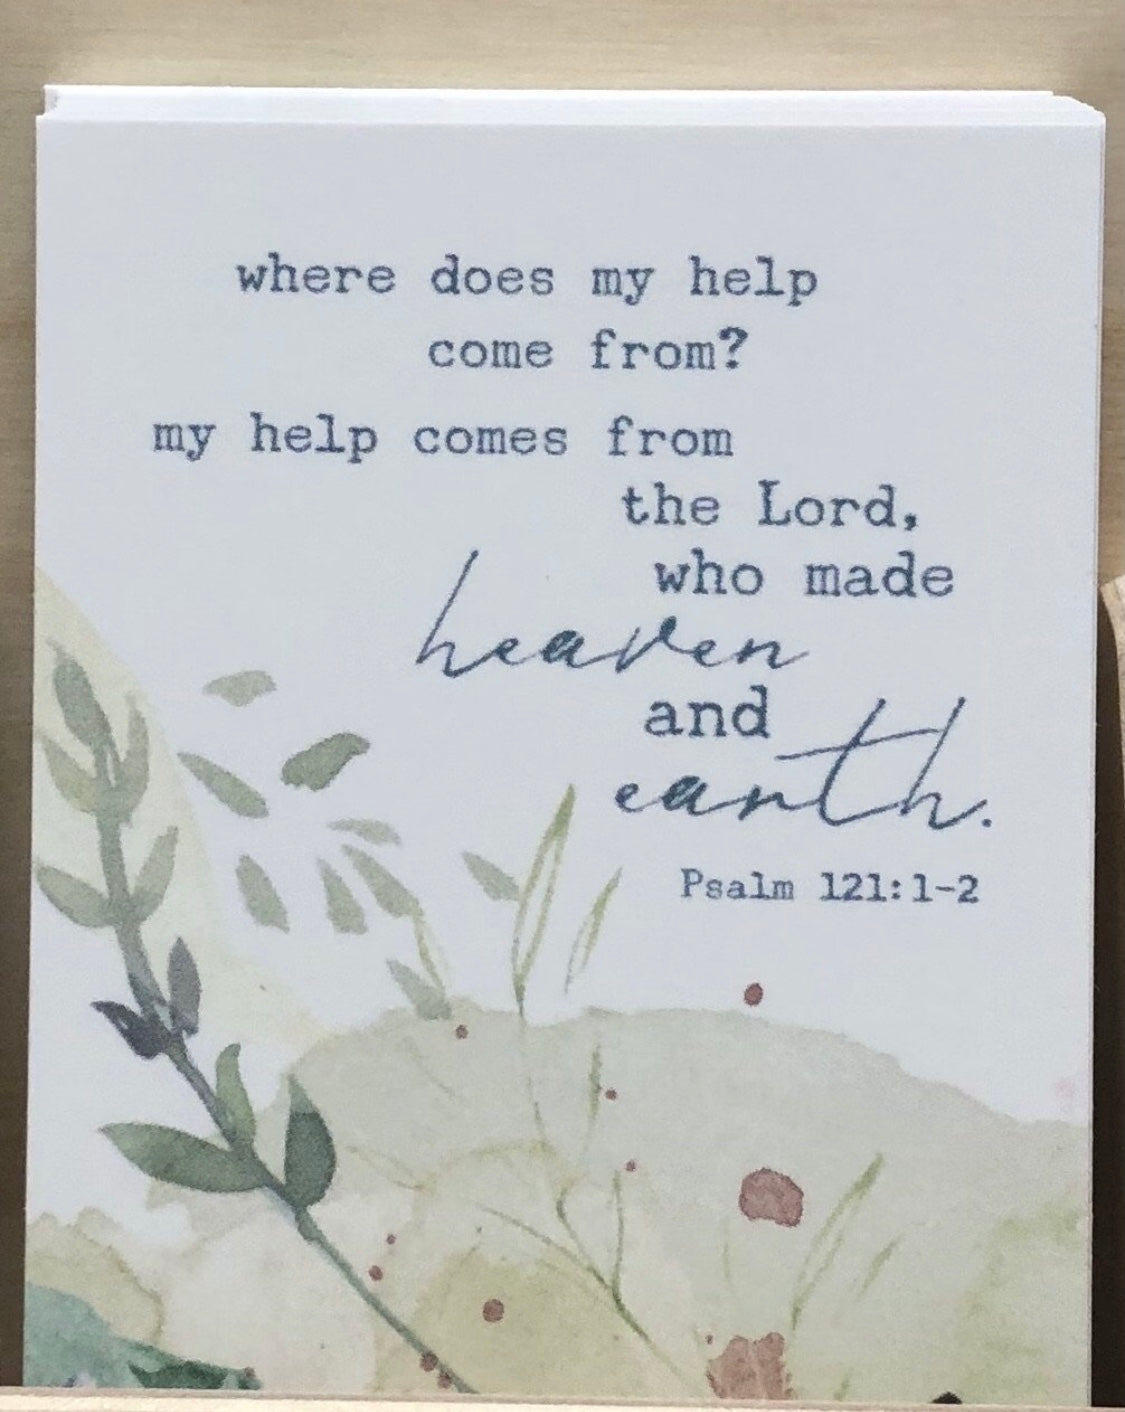 Prayer Life Share Card - Where Does My Help Come From?